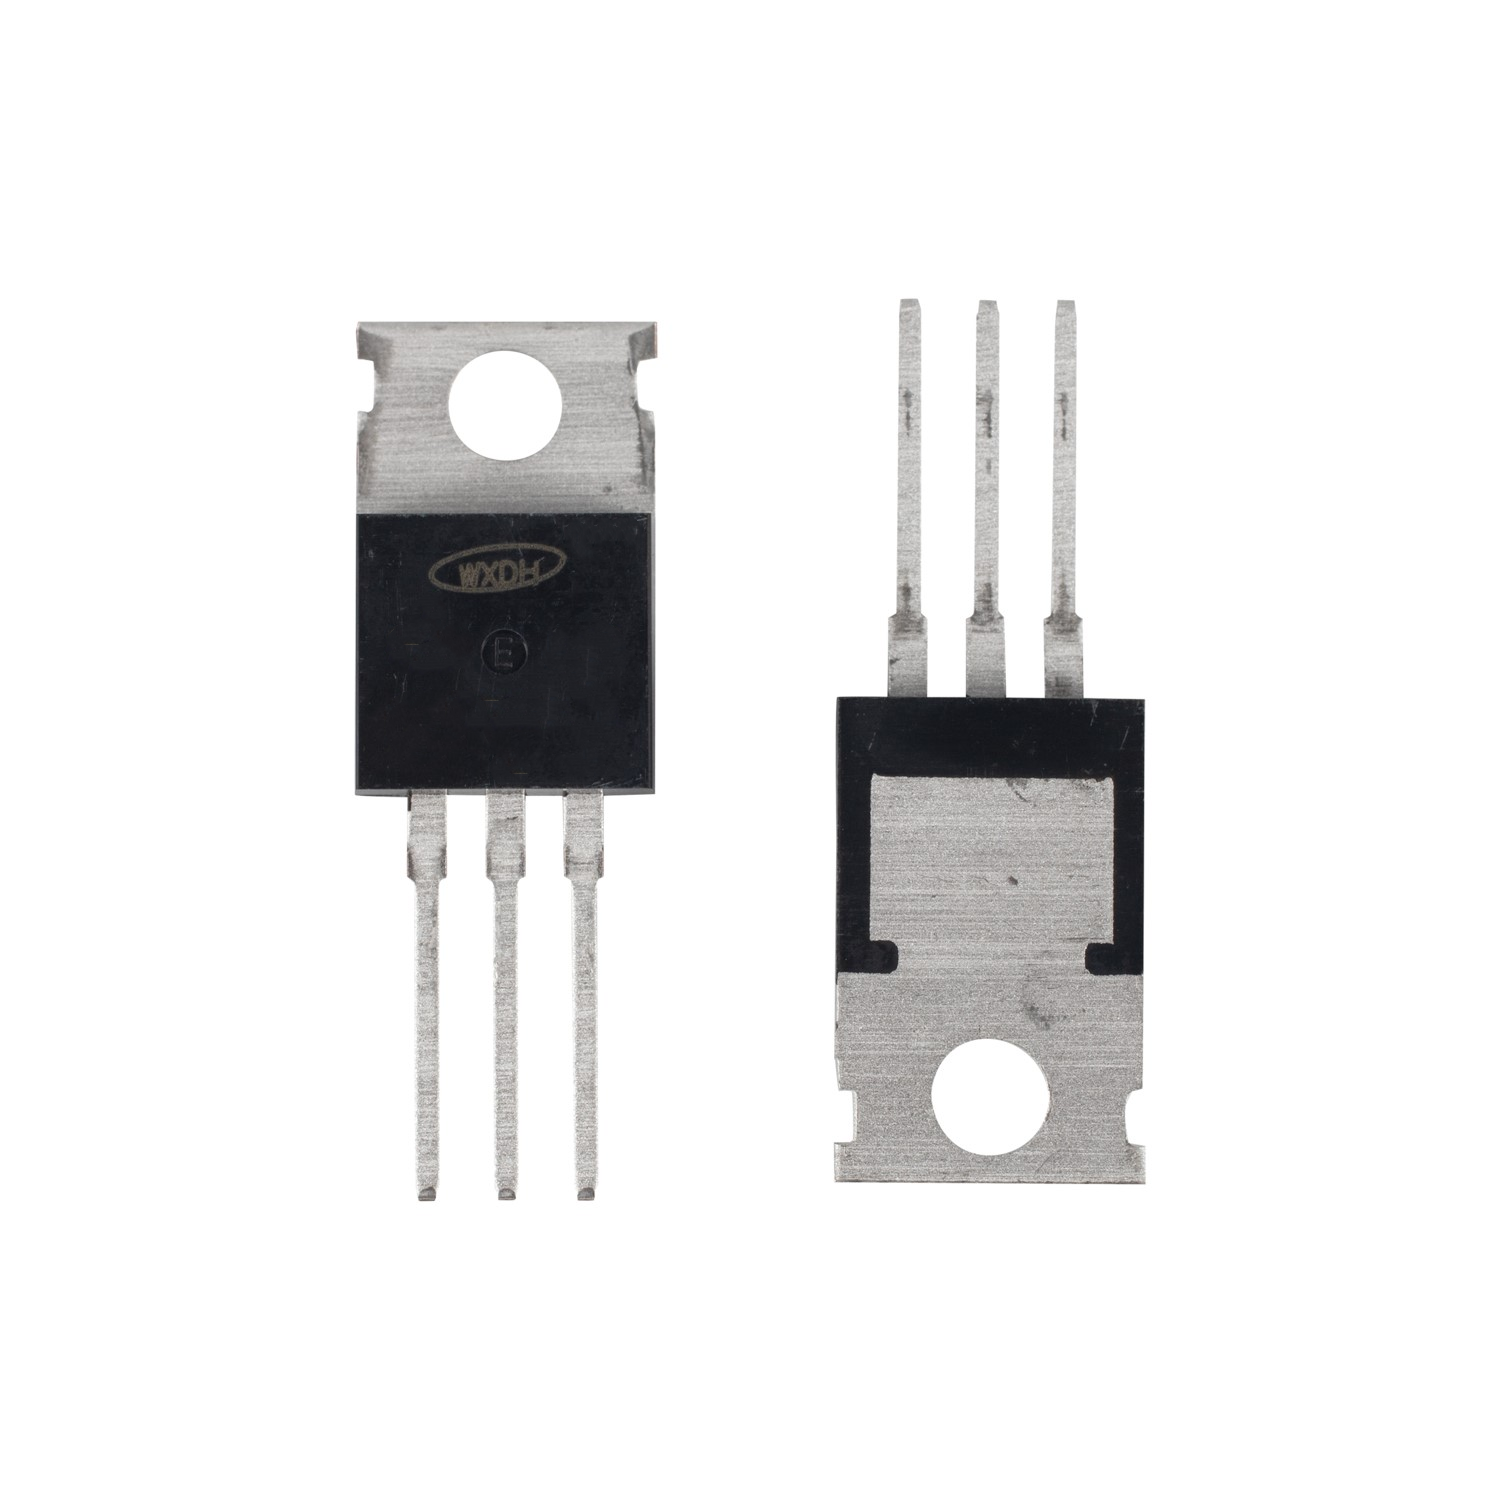 80A 80V N-channel Enhancement Mode Power MOSFET